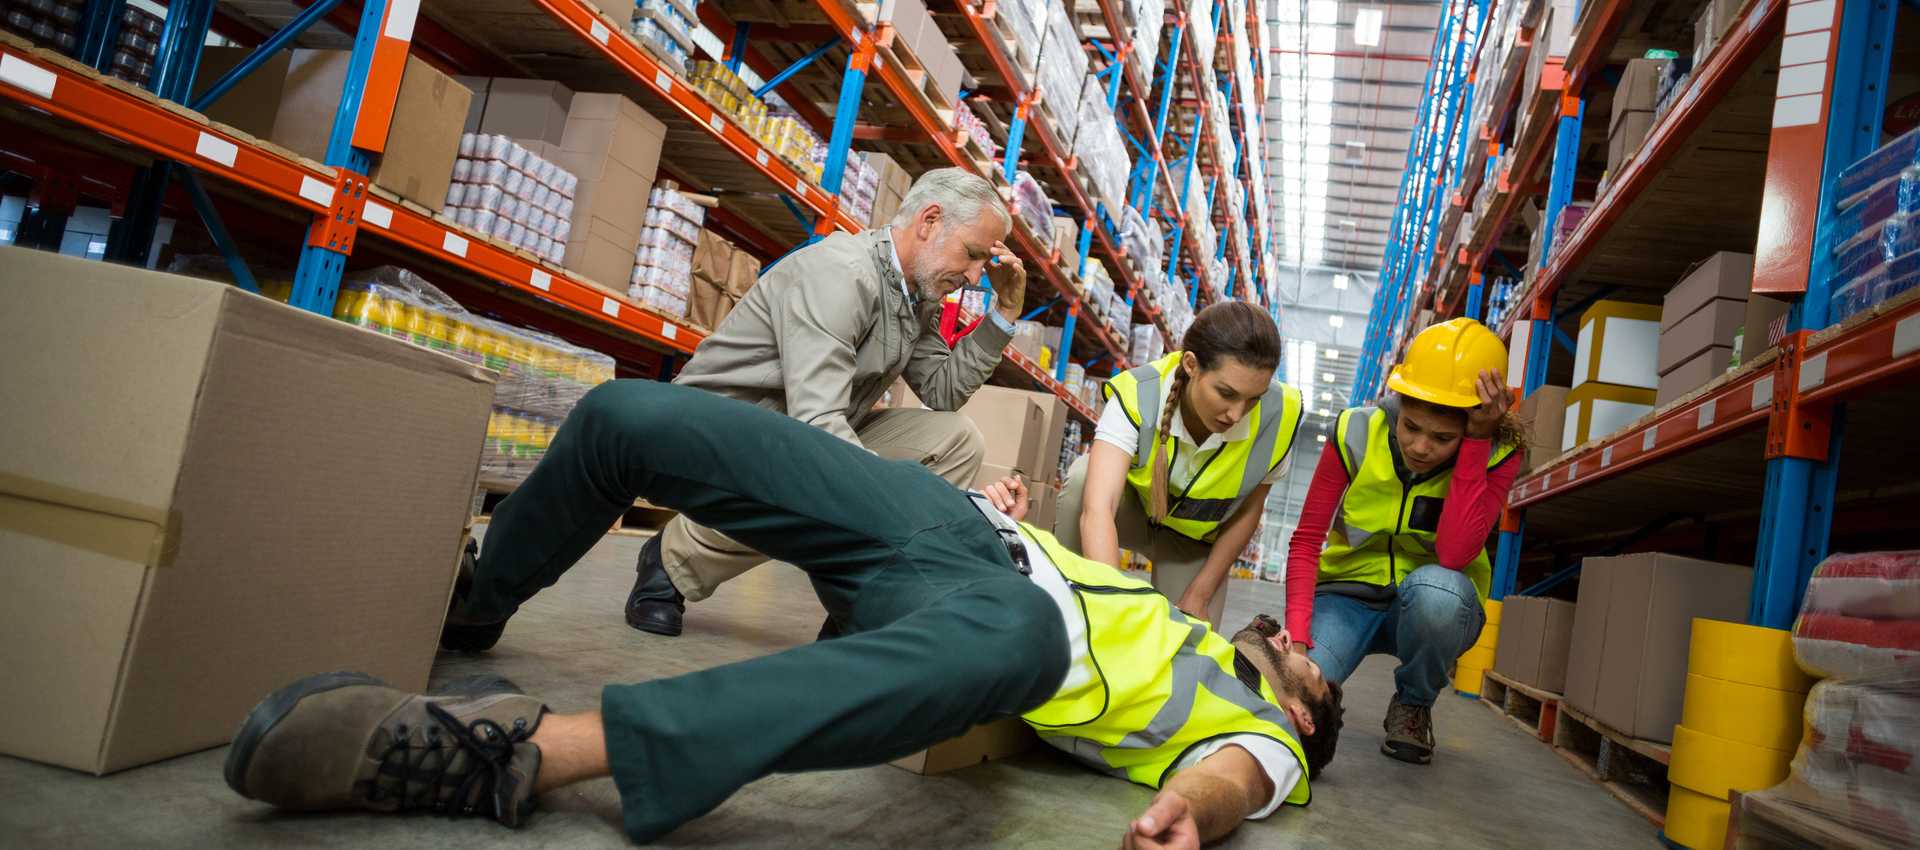 5 Tips to Reduce the Accident Rate at Your Facility